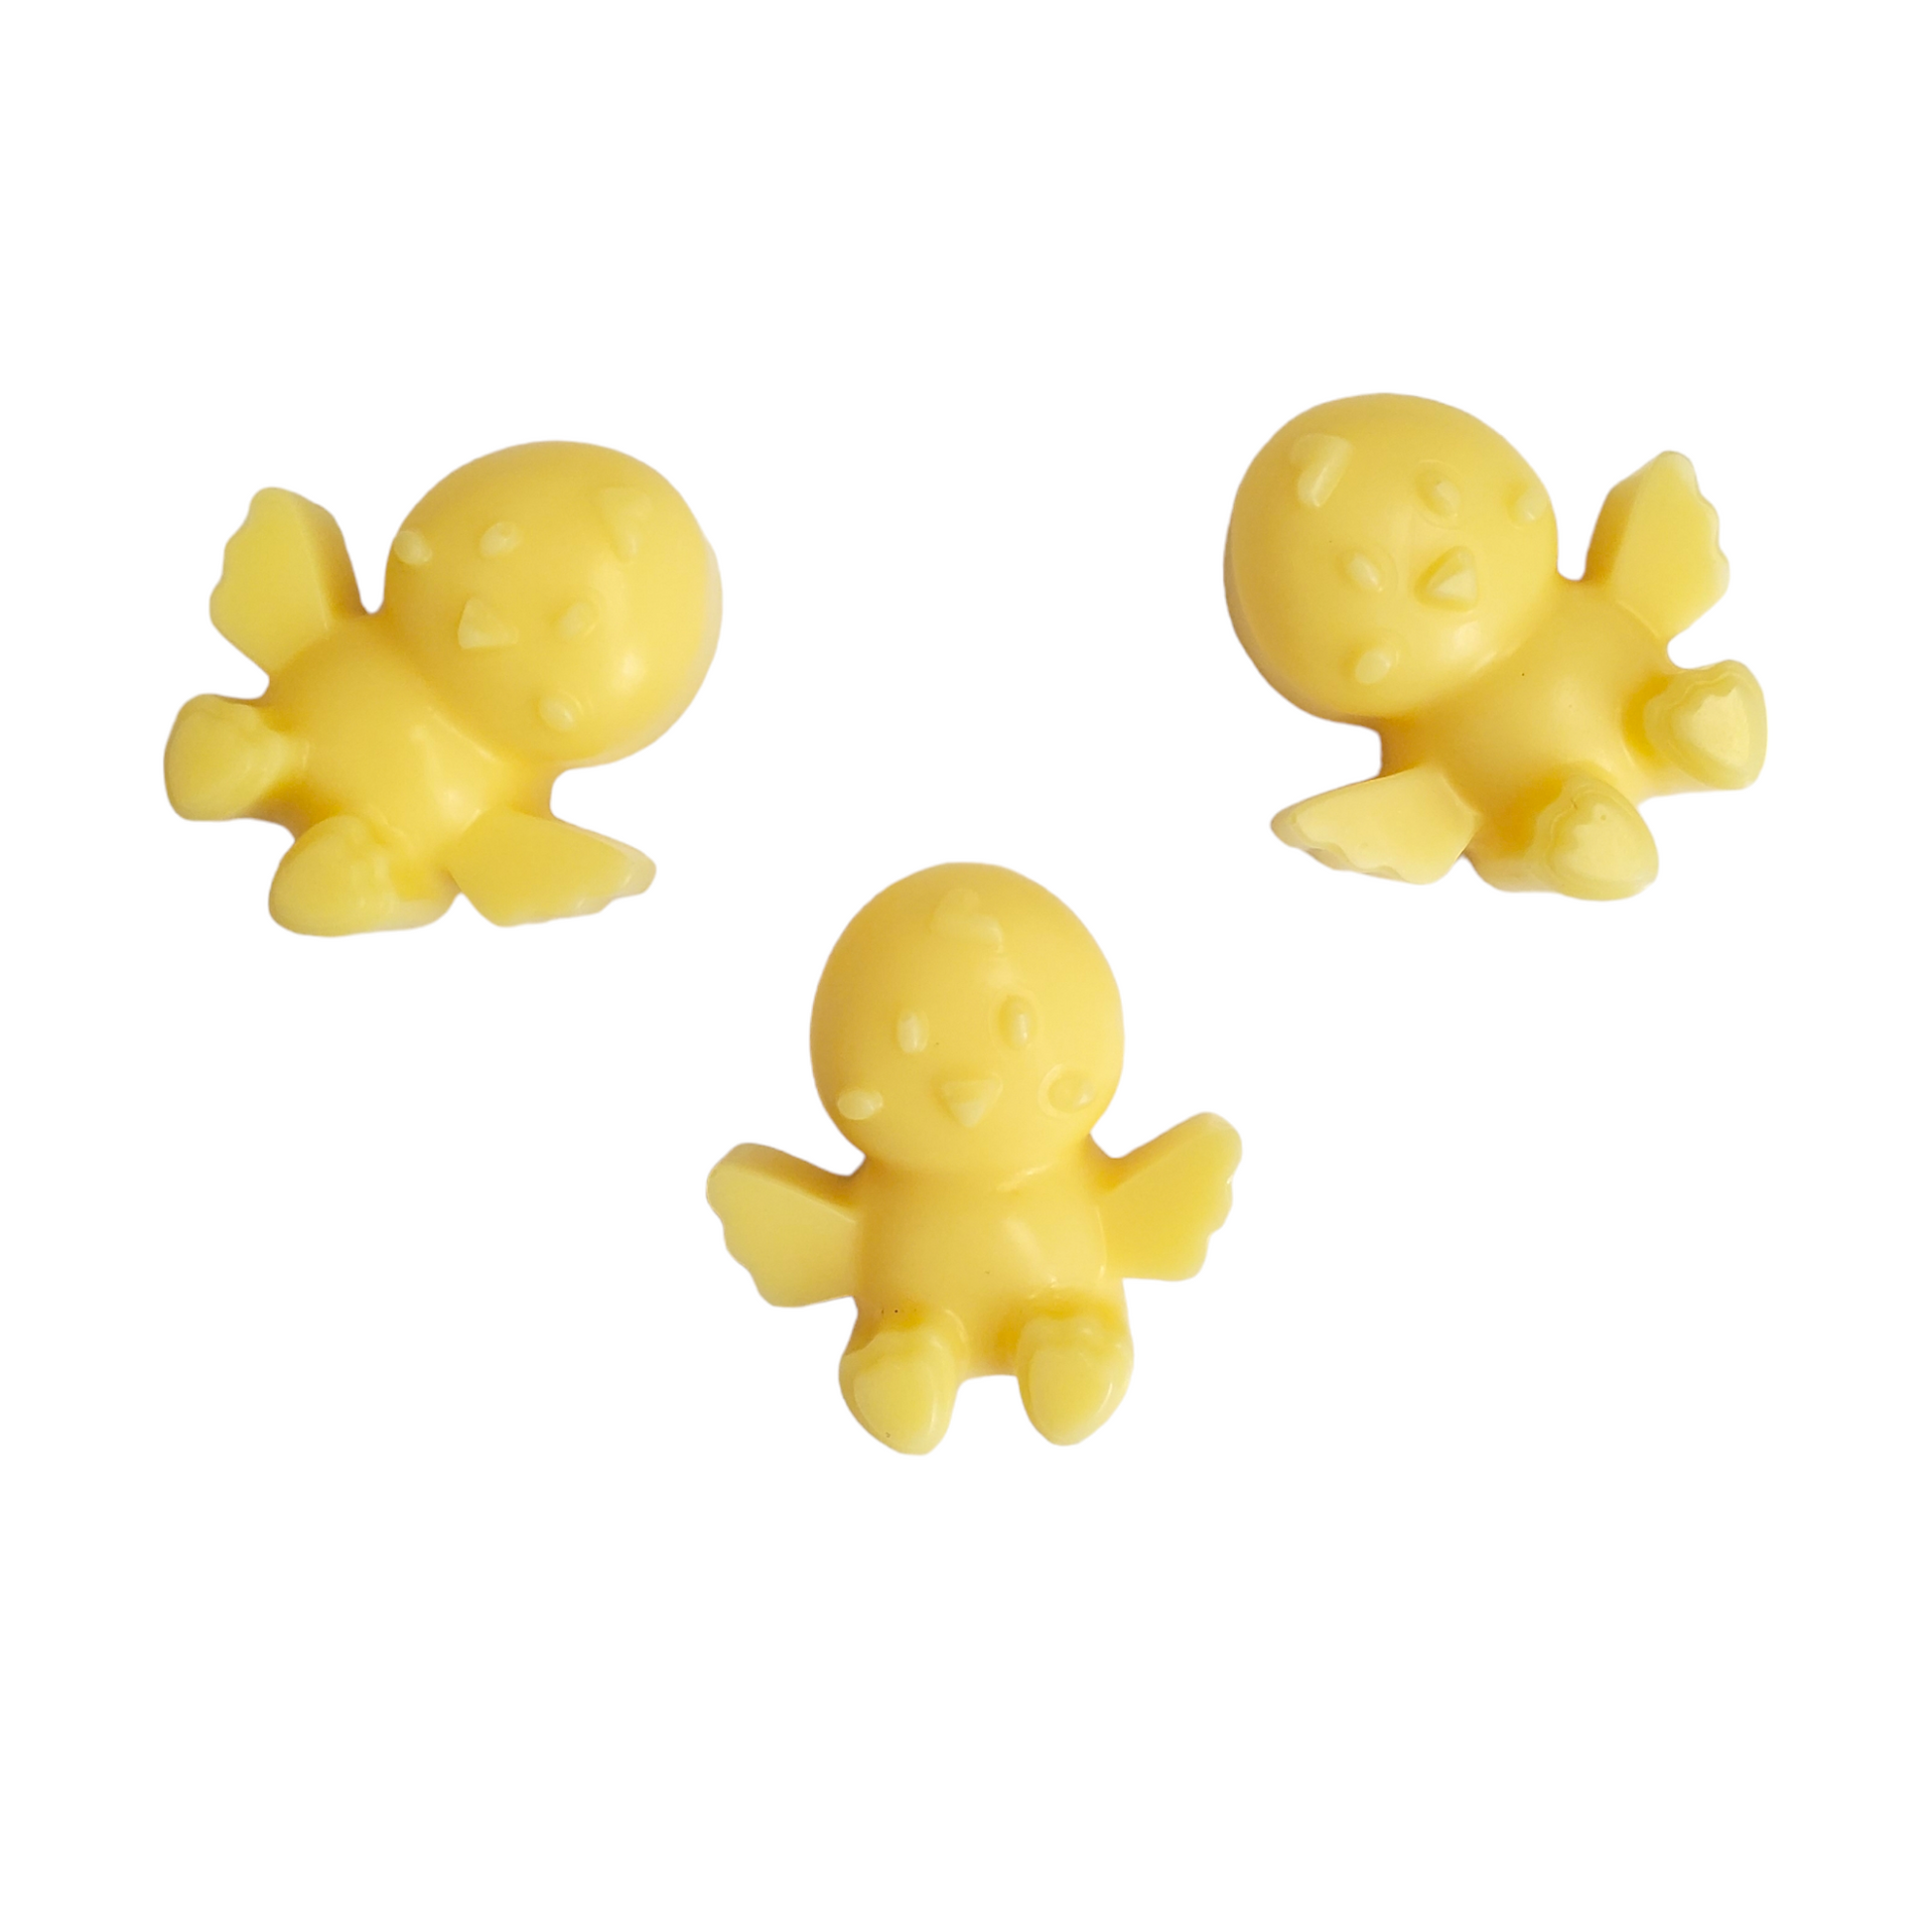 3 yellow baby chicken soy wax melts